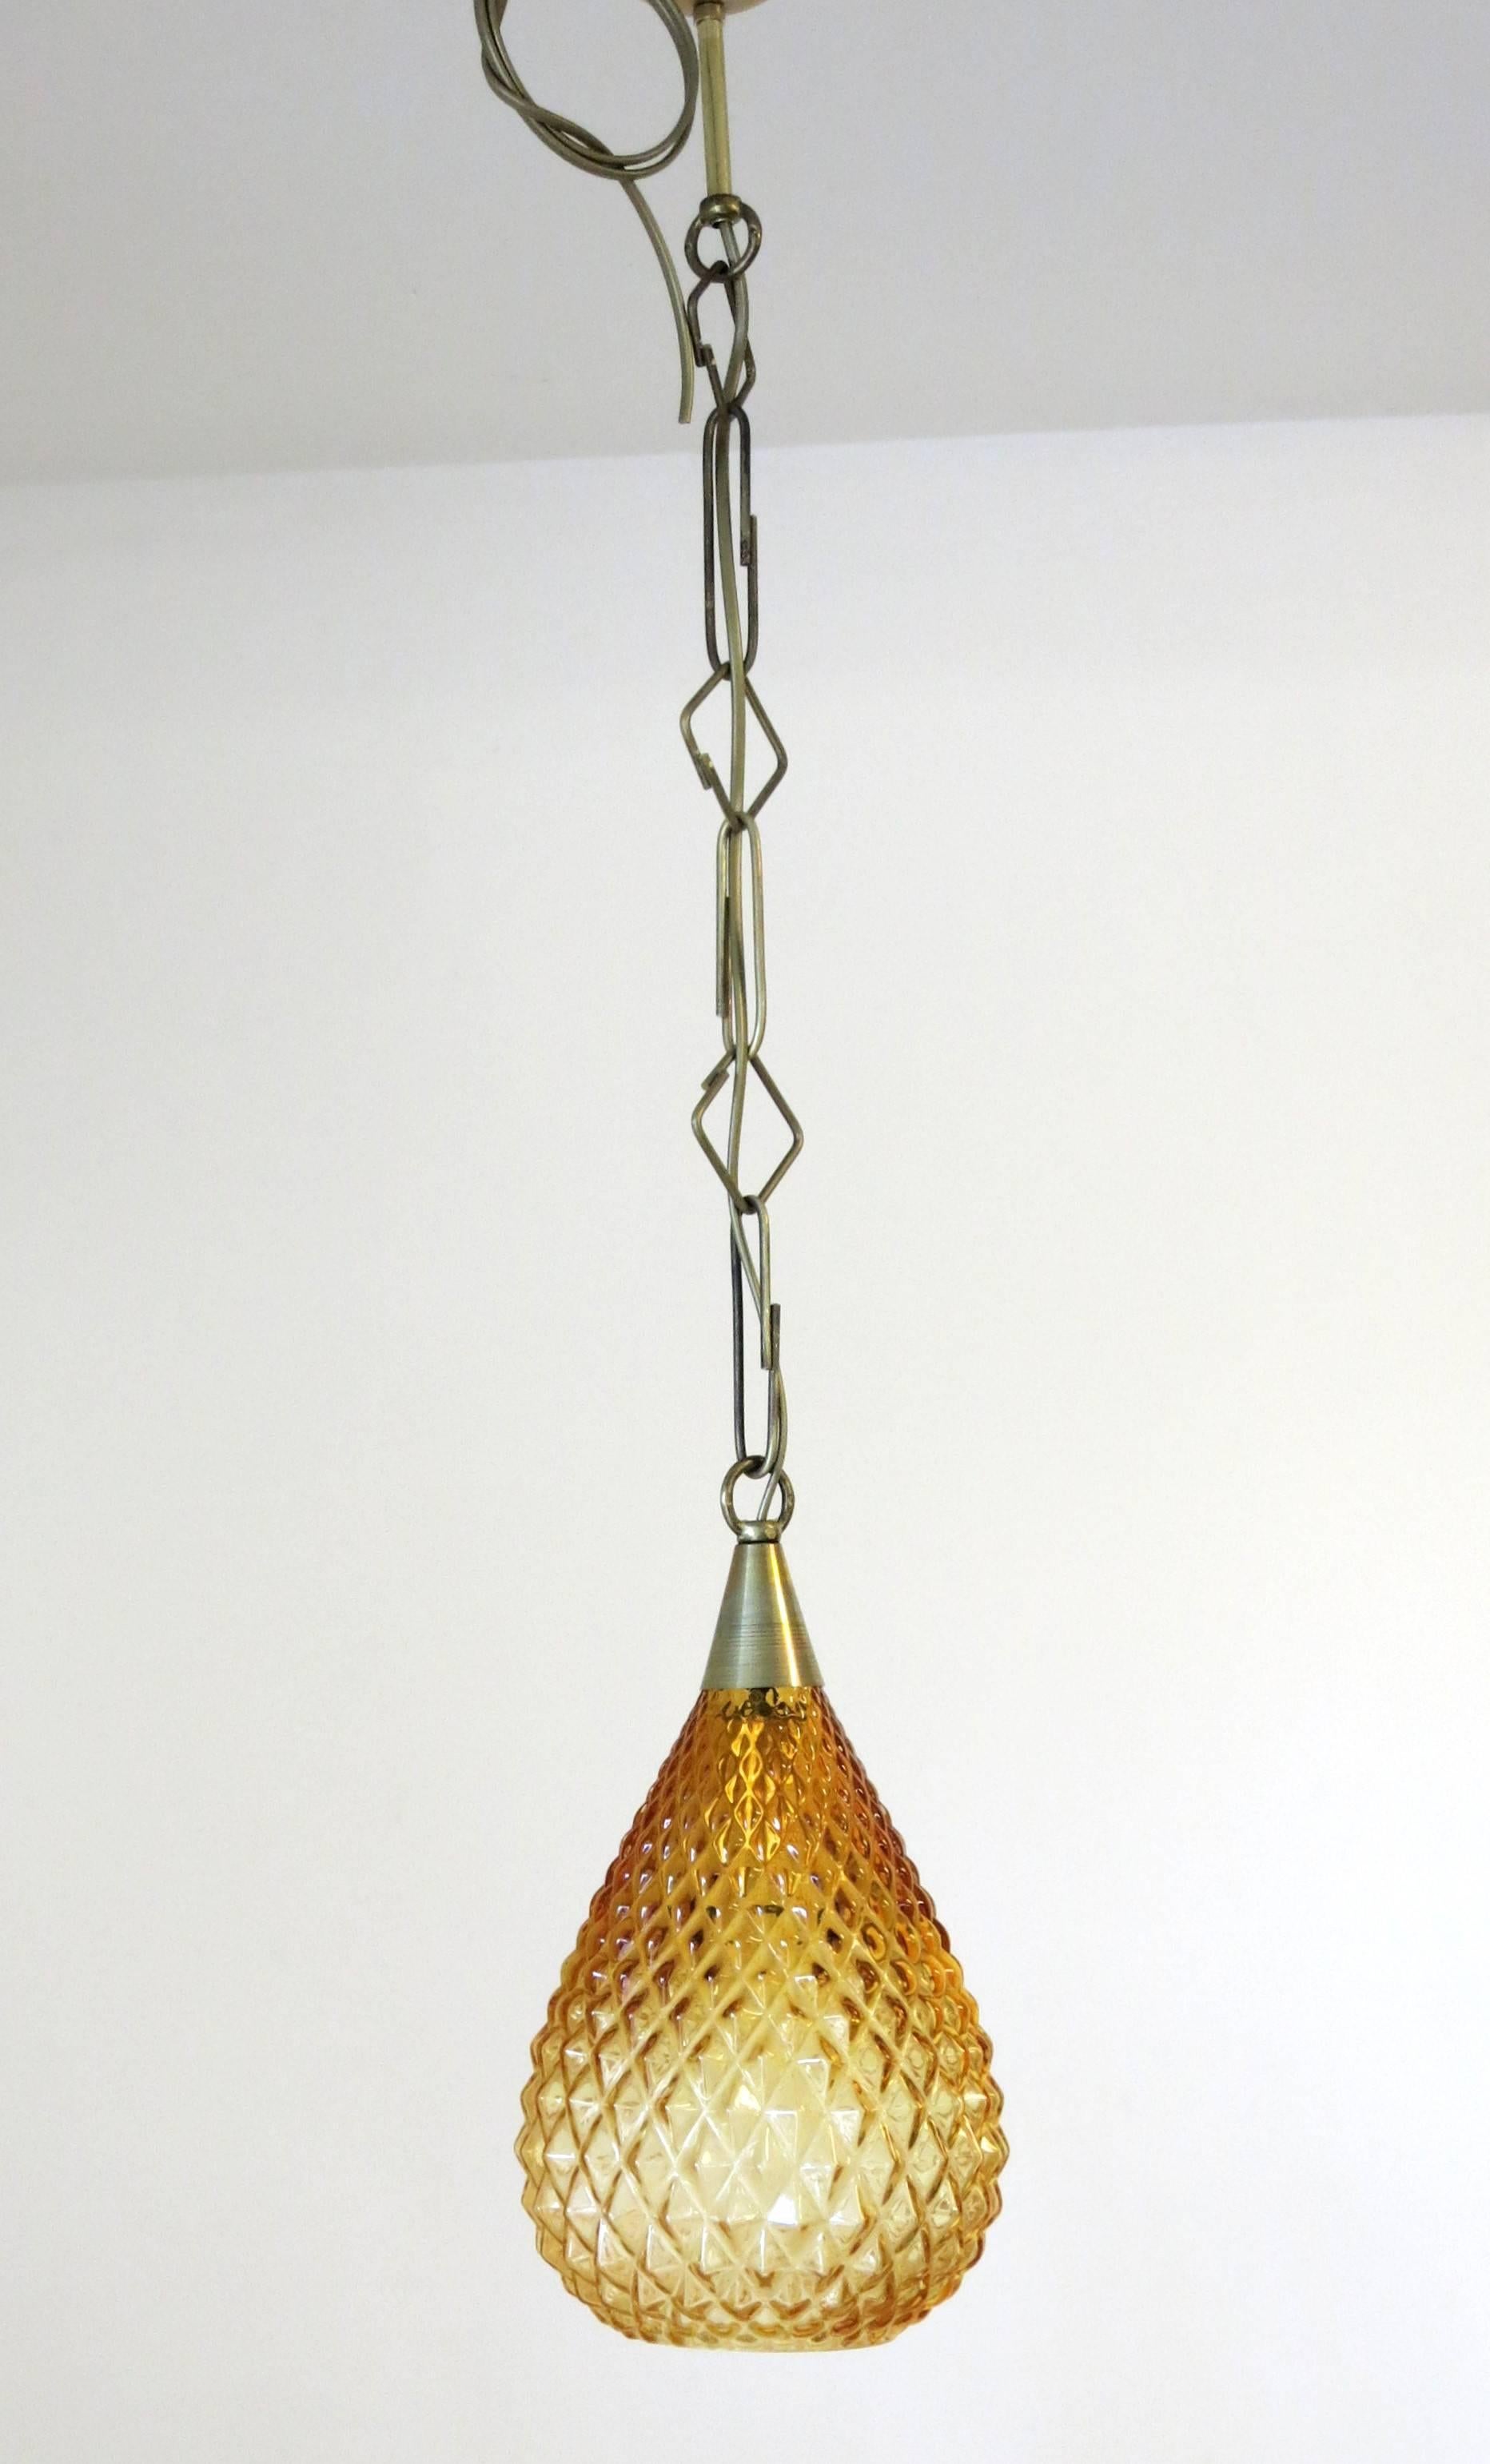 Italian pendant with amber Murano glass and diamond shaped details, mounted on brass frame / Designed by Fabio Bergomi for Fabio Ltd / Made in Italy 
1 light / E12 type / max 60W 
Height: 13 inches plus chain and canopy / Diameter: 7 inches
1 in